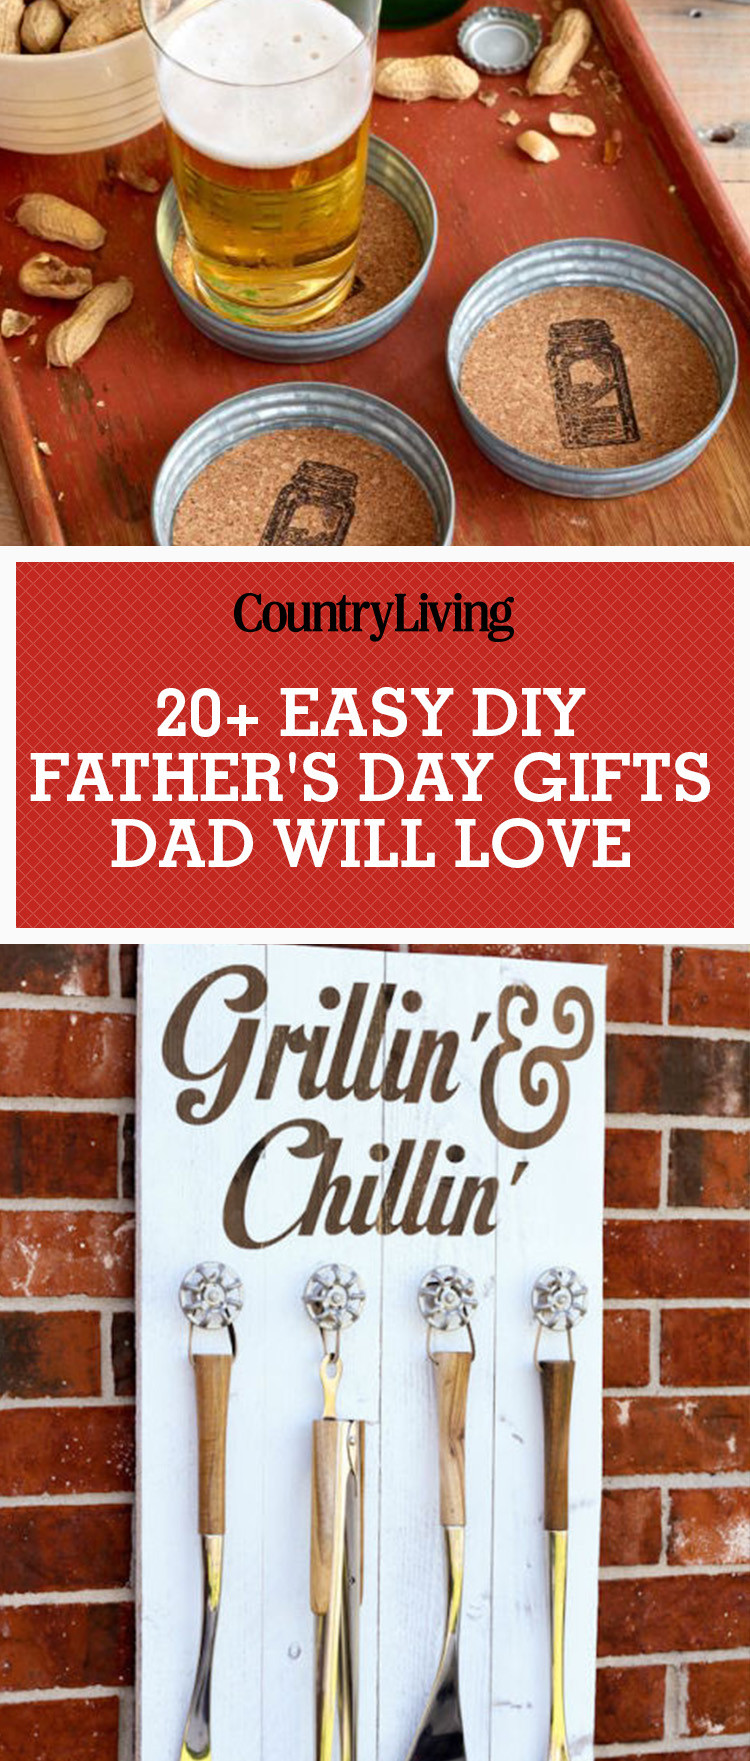 DIY Gifts For Fathers Day
 25 DIY Fathers Day Gifts & Crafts Homemade Ideas for